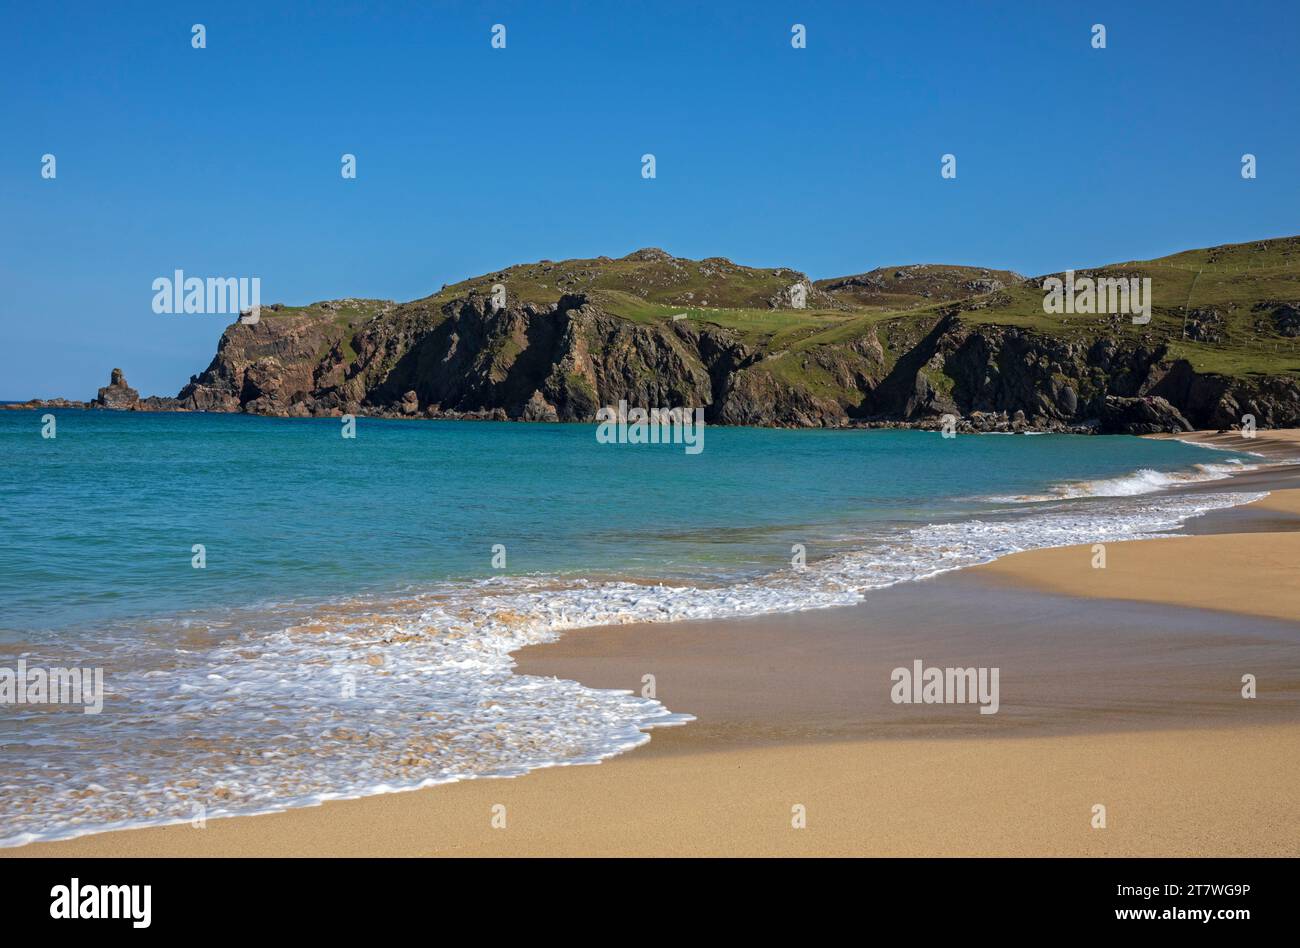 Dalmore Beach, Isle of Lewis, Outer Hebrides, Scotland, UK. Traigh Dhail Mhor Stock Photo